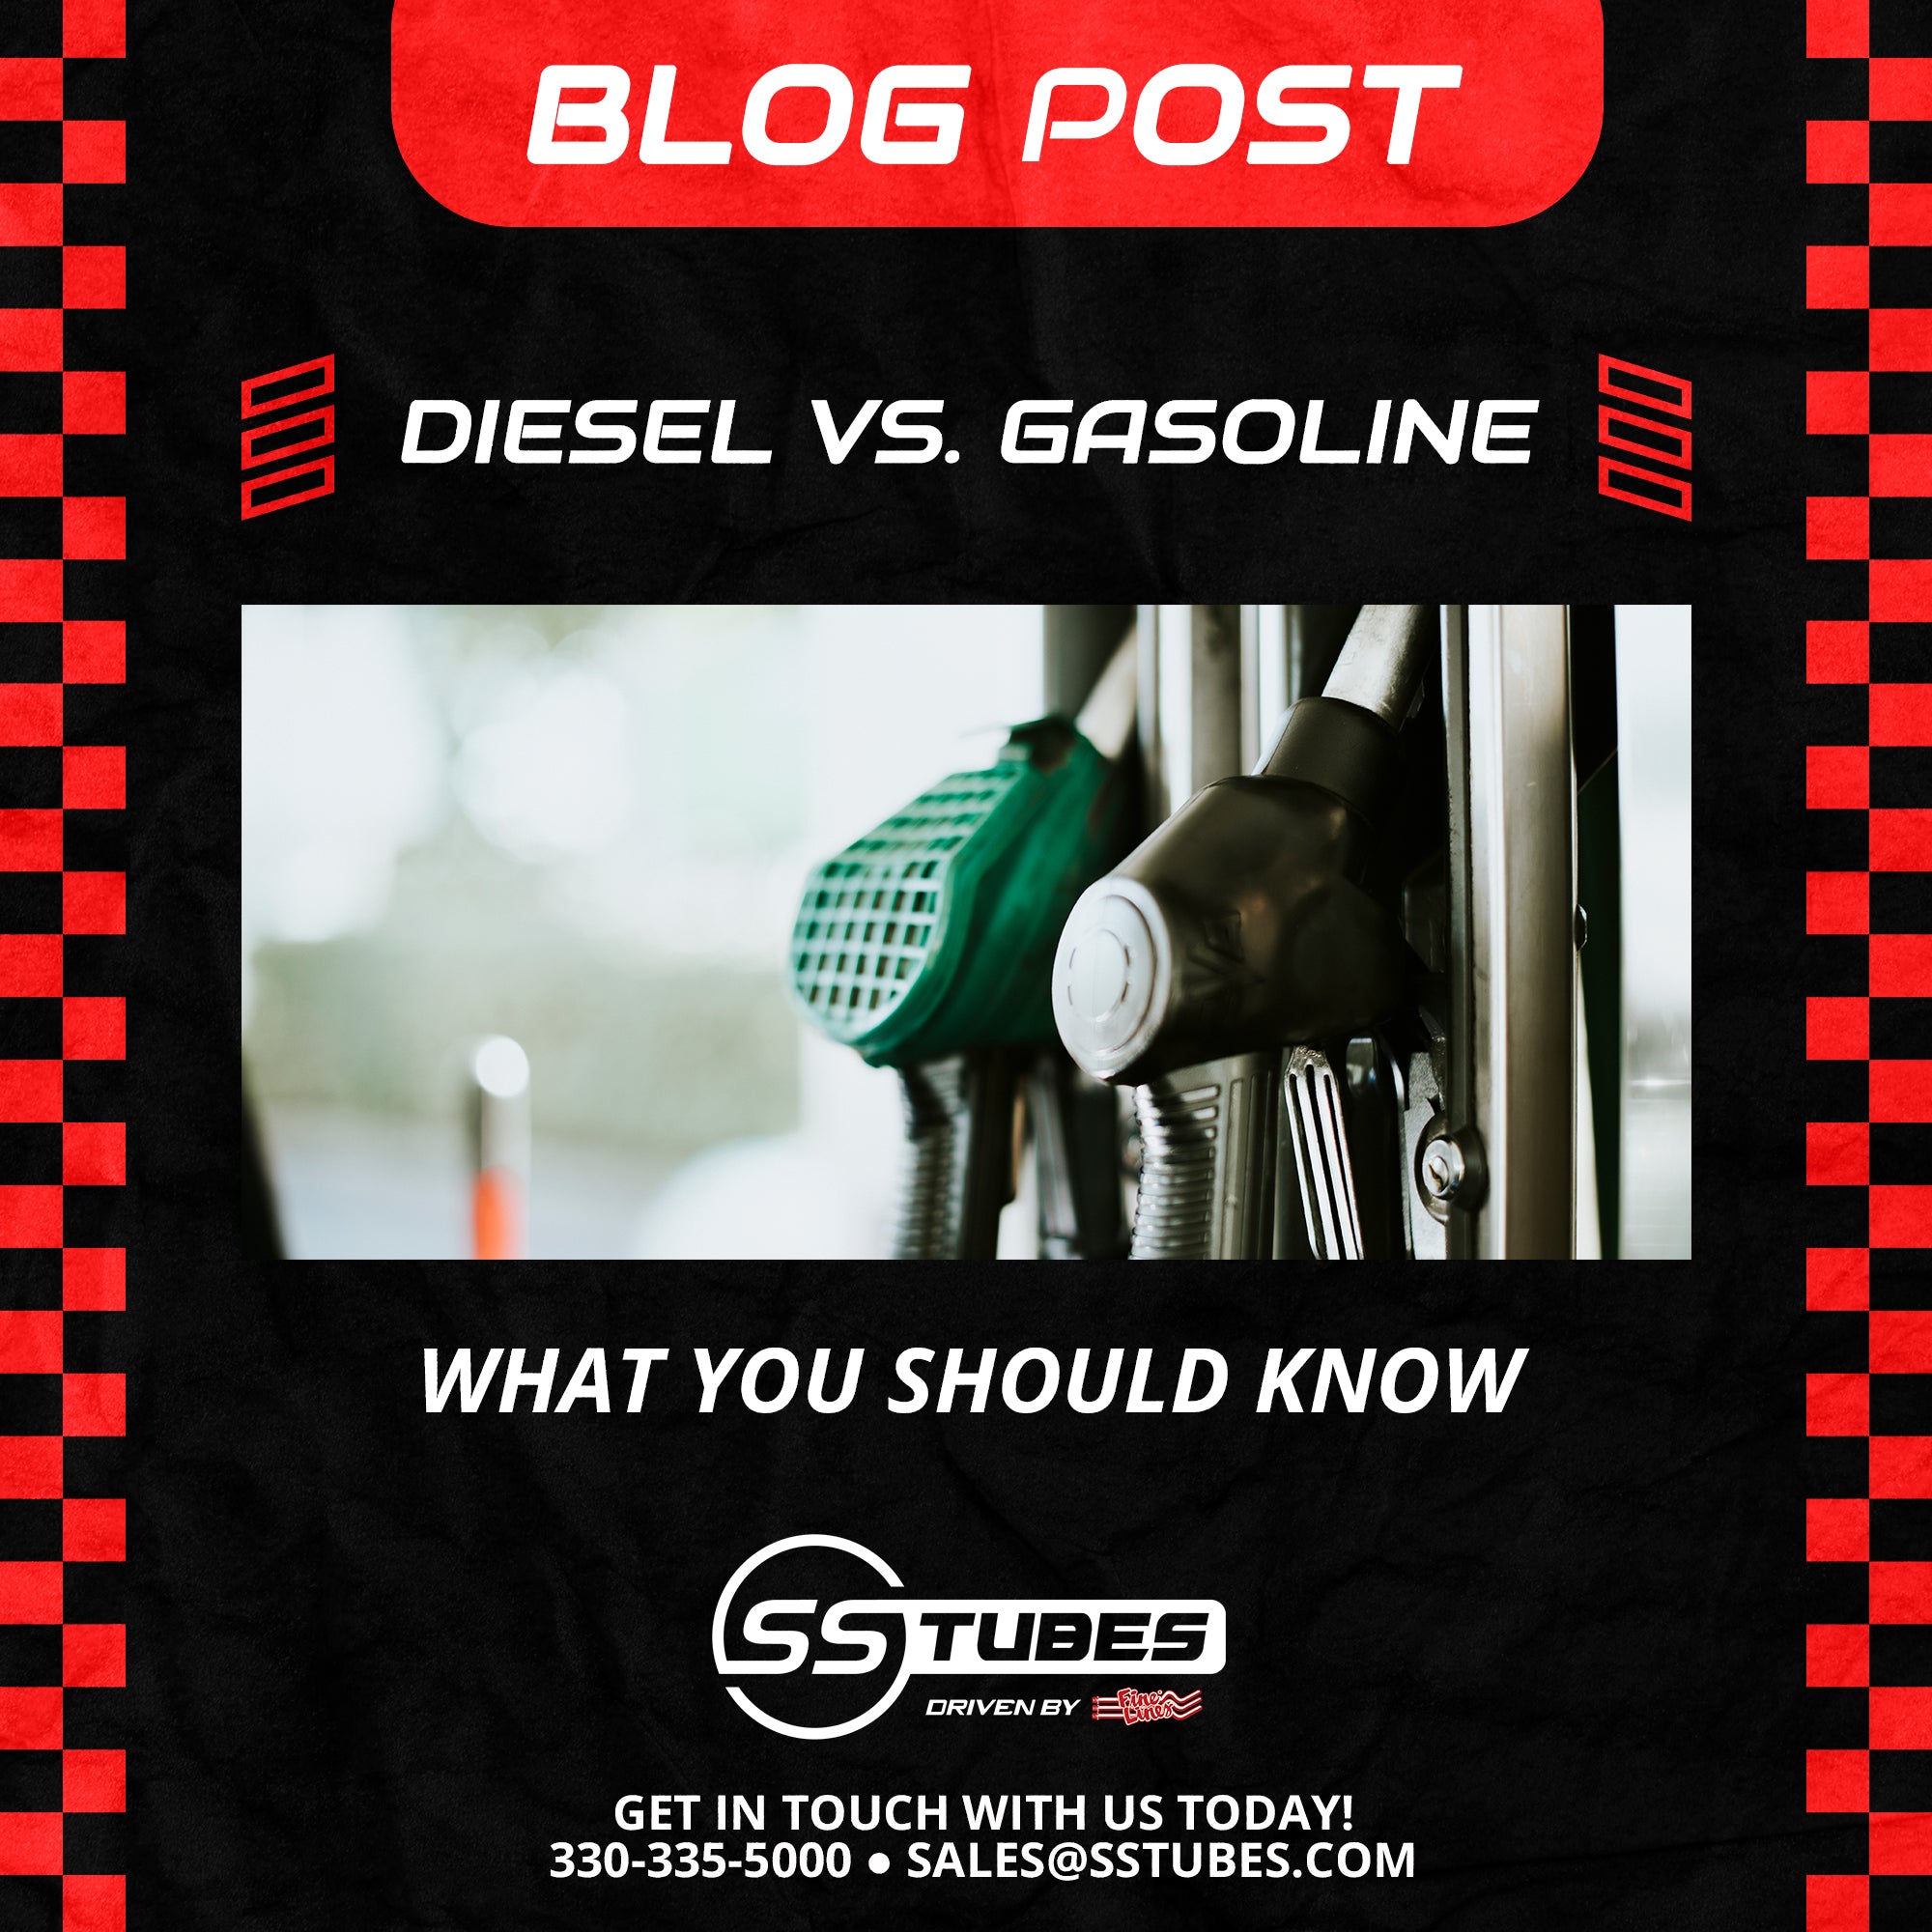 Diesel vs Gasoline: What You Should Know